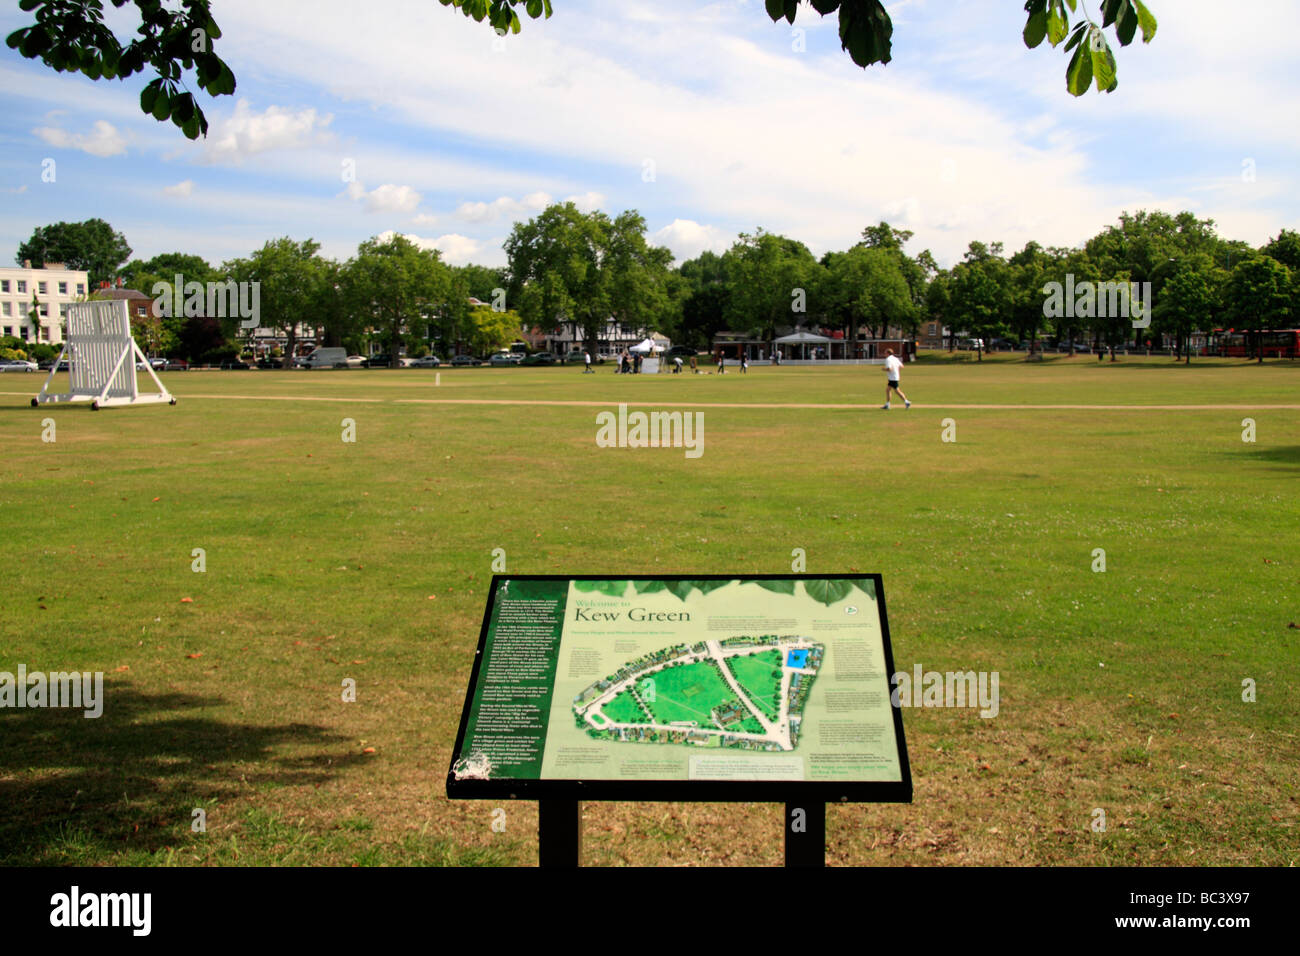 Looking across the cricket pitch of Kew Green, just outside the Royal Botanic Gardens, Kew, Surrey, England. Stock Photo